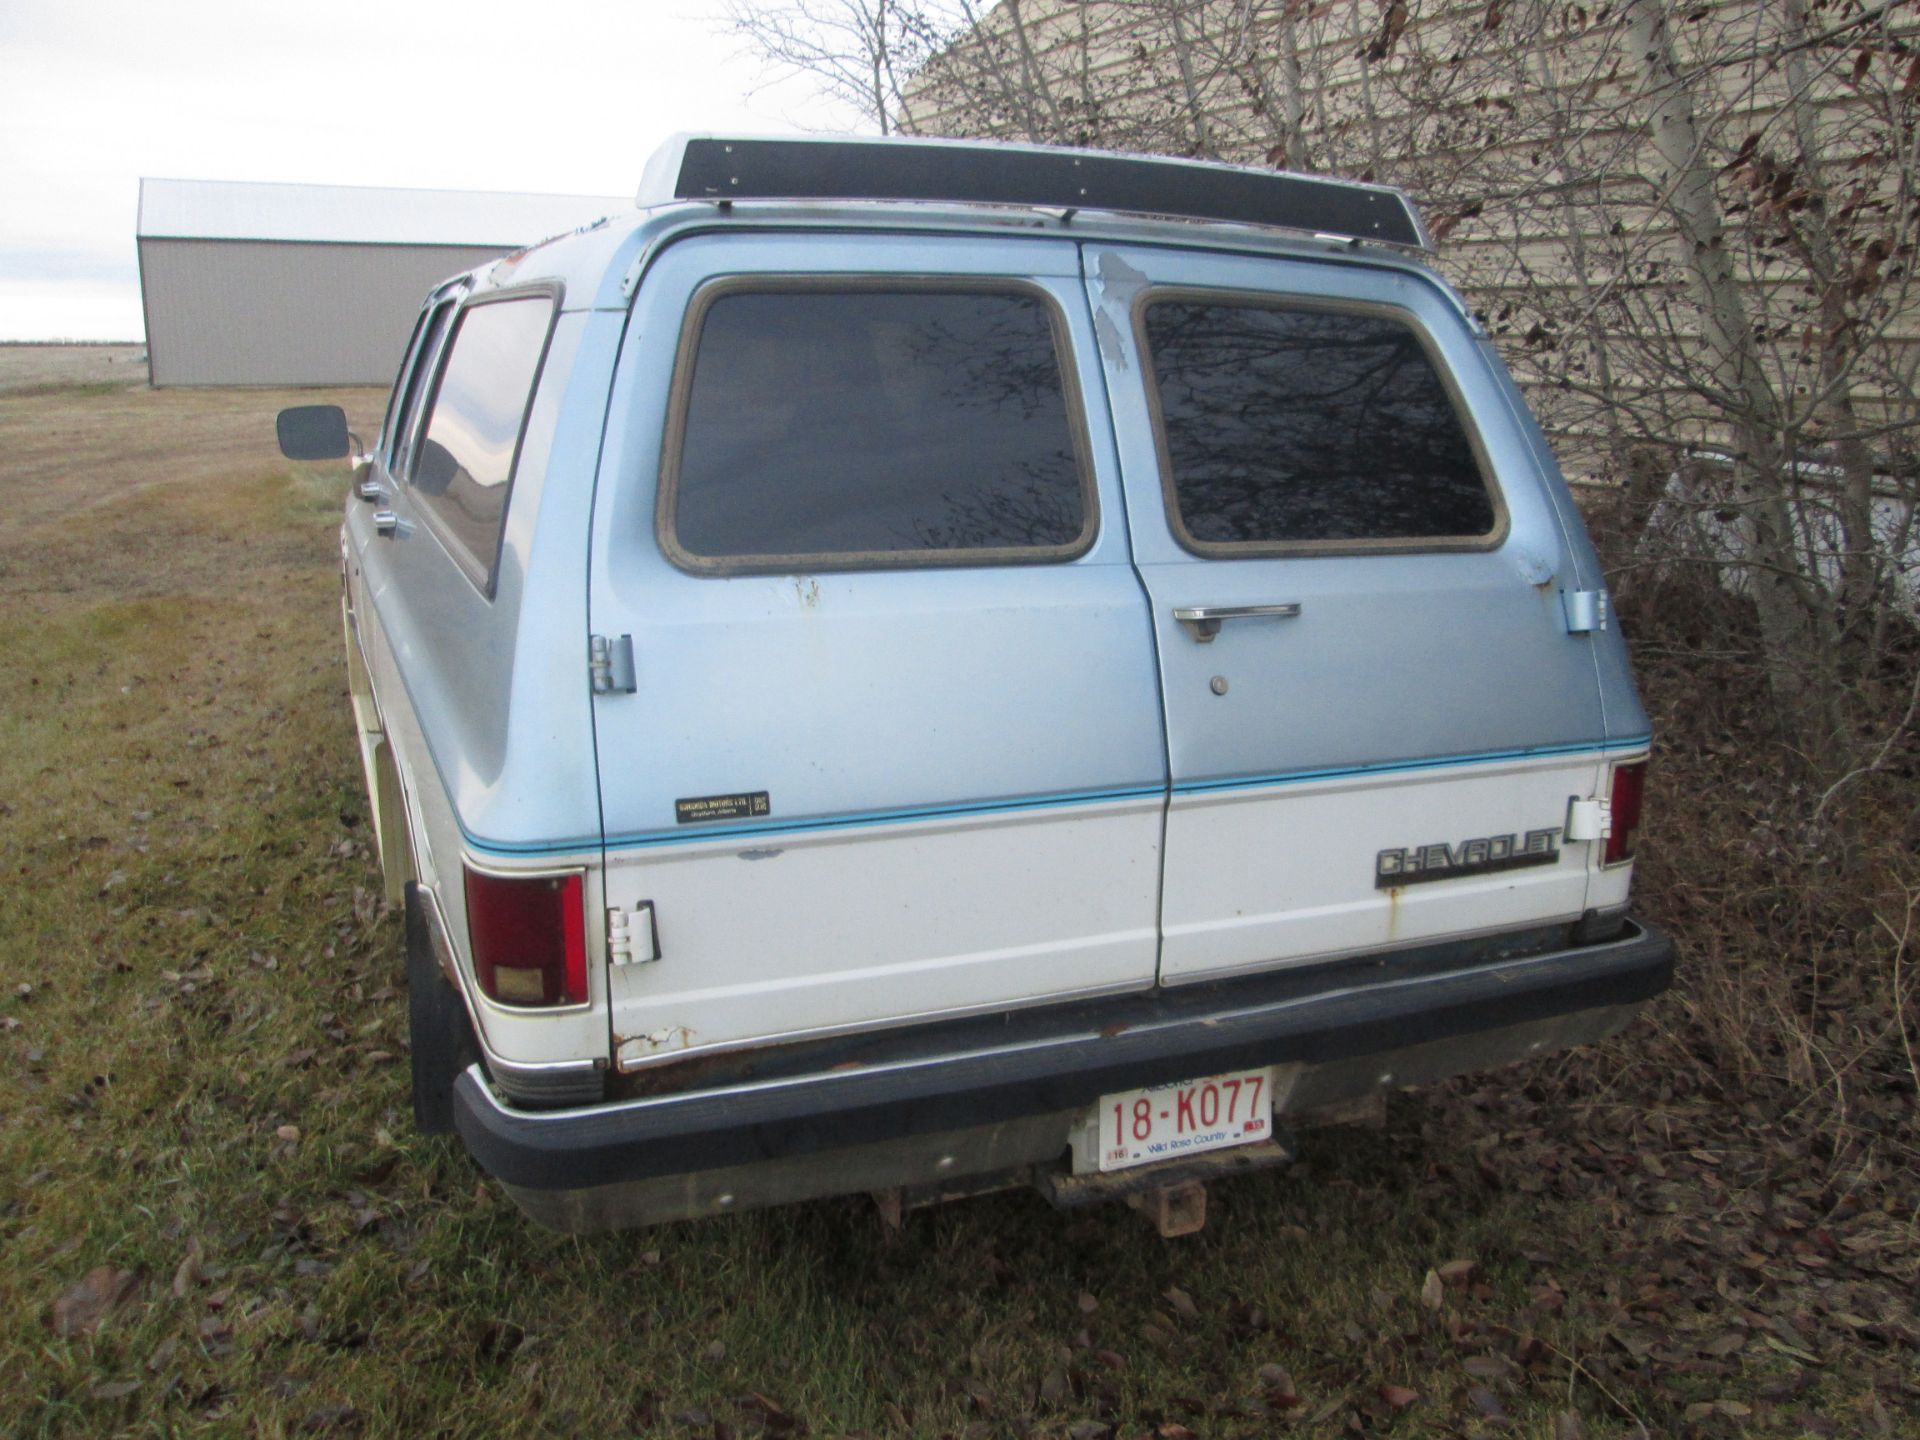 1987 Chev 1500 Suburban, Silverado, 3 row seating, showing 106,385 km, 2WD, 350 eng, auto, A/T/C - Image 5 of 5